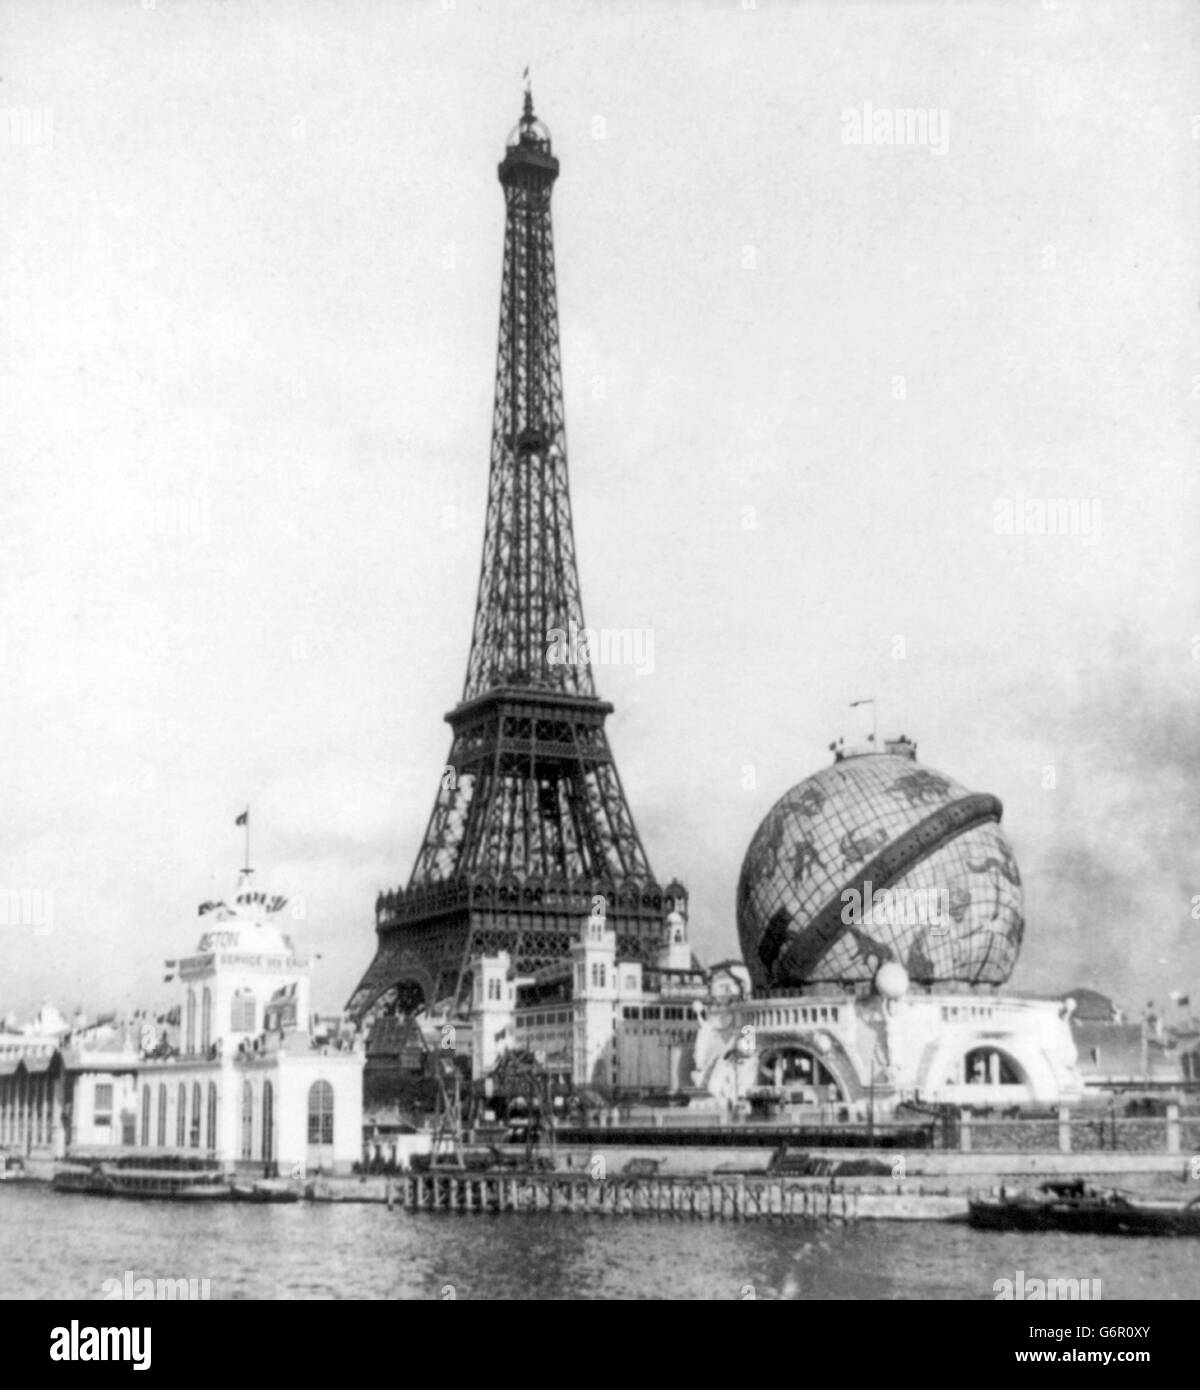 Paris Exposition, 1900. Eiffel Tower, River Seine and globe from Point Passay, Paris Exposition 1900, Paris, France. The Eiffel Tower was built to serve as the entrance to the Exposition Universelle in 1889. Stock Photo